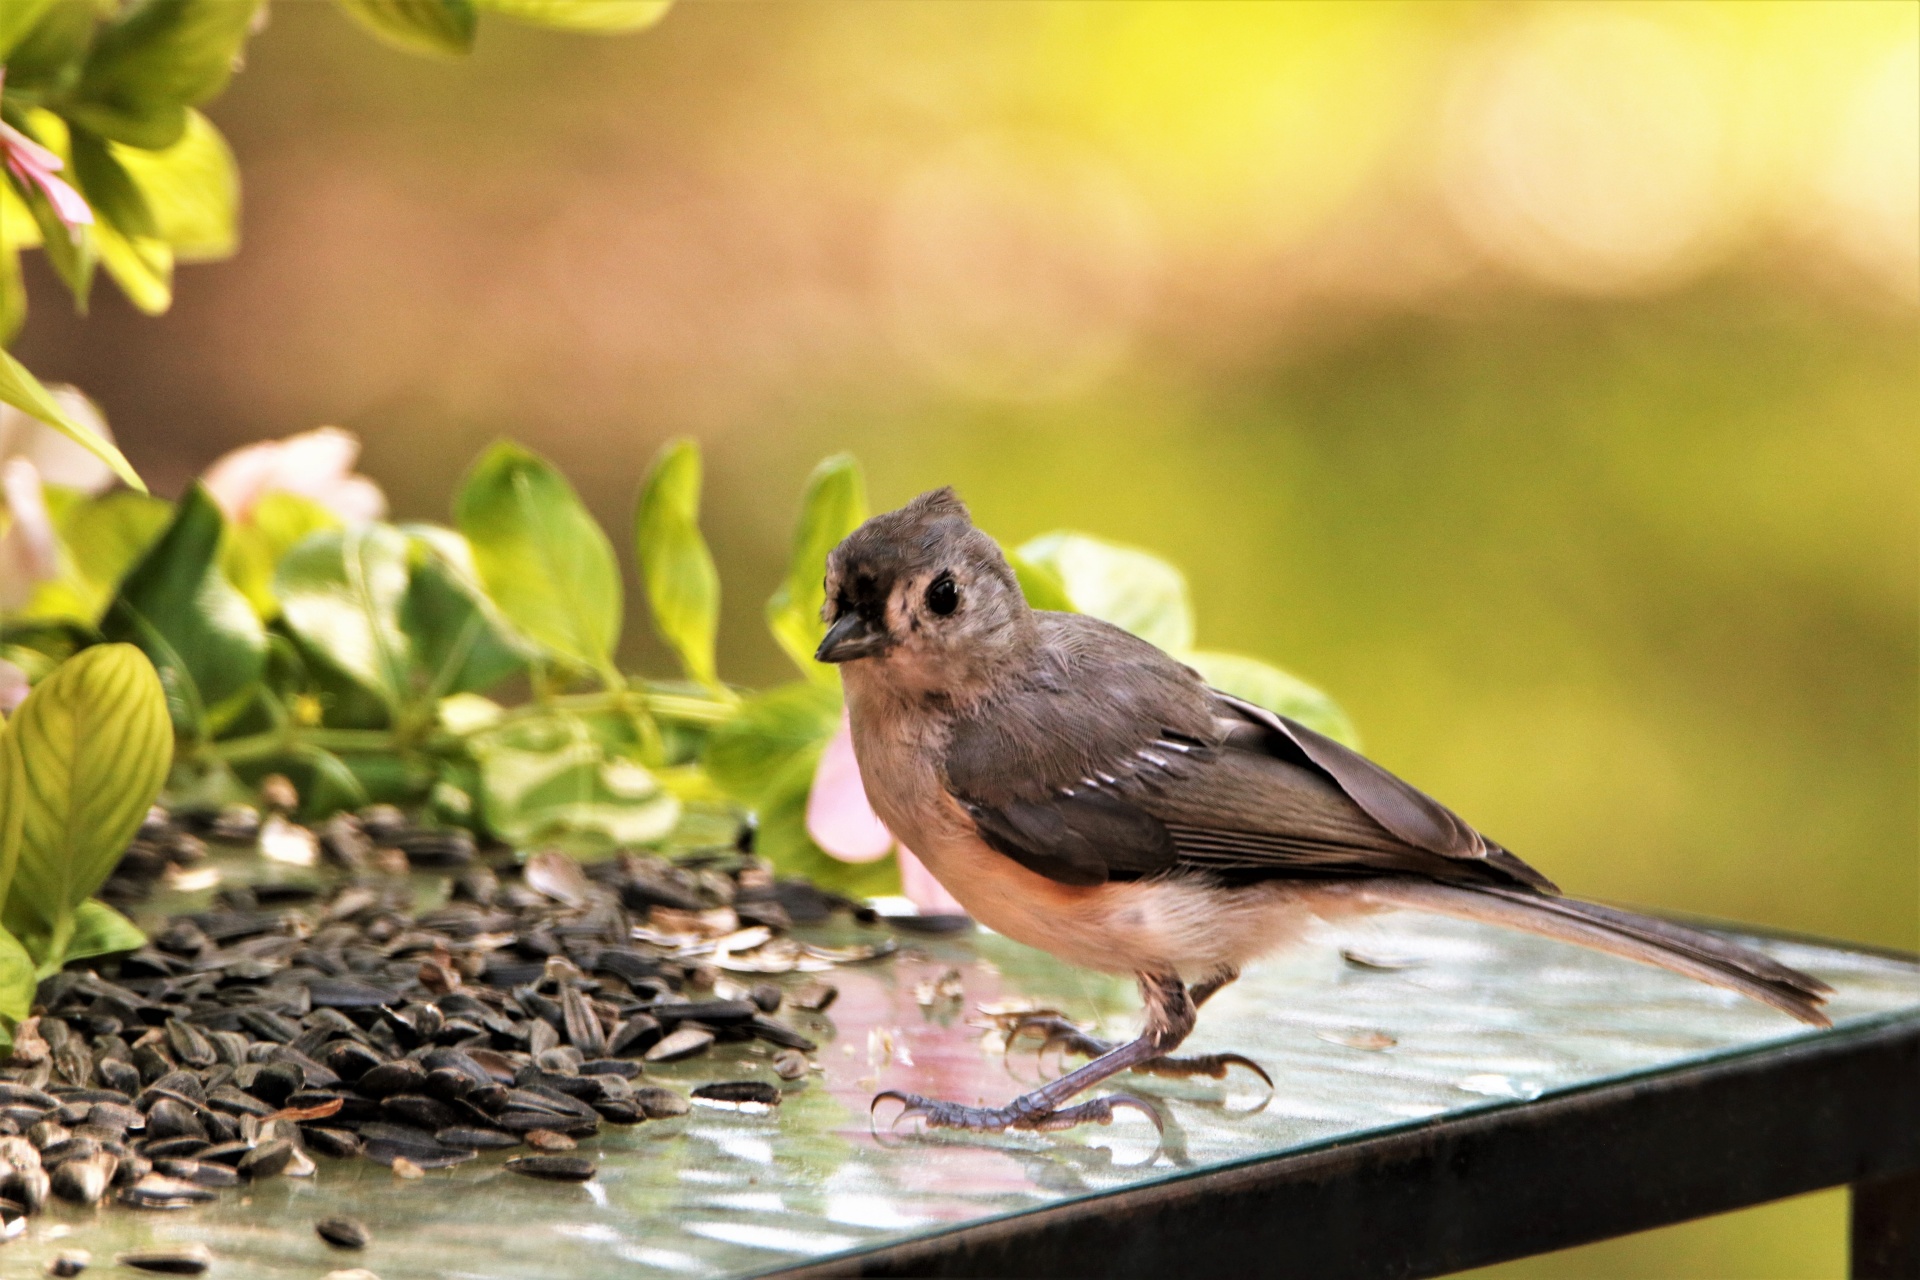 A cute young tufted titmouse bird is perched on a table with green plant leaves and sunflower seeds, on a blurred green background.